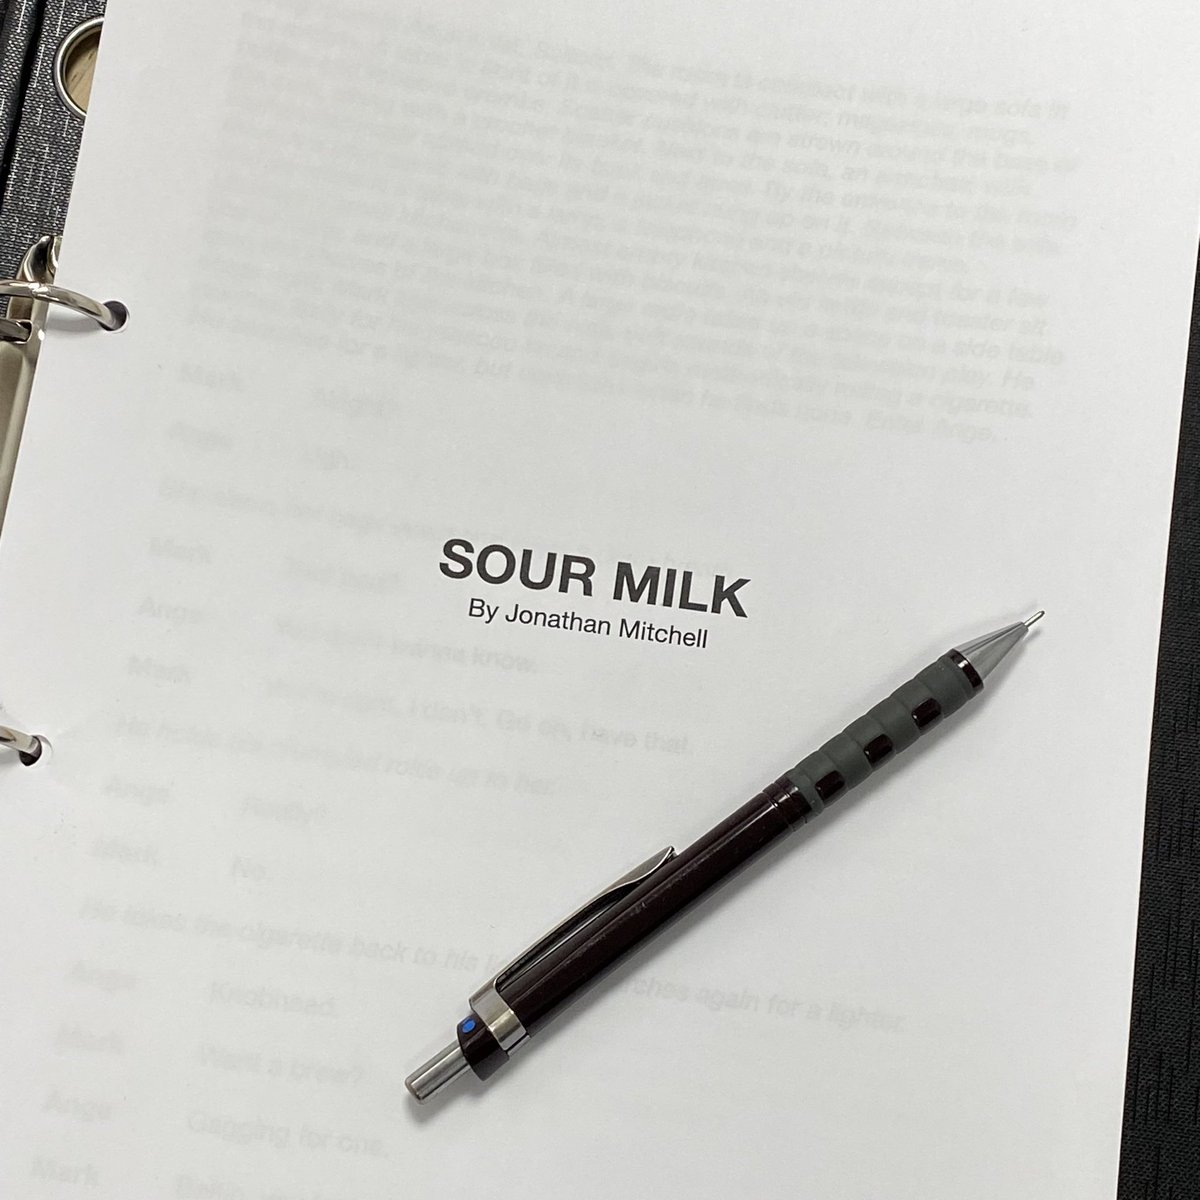 SOUR MILK rehearsals are underway and tickets have already started flying 💨 You don’t want to miss this one - BOOK NOW! 📅 5 - 9 December 📍 The King’s Arms, Salford 🎟️ redbricktheatre.co.uk